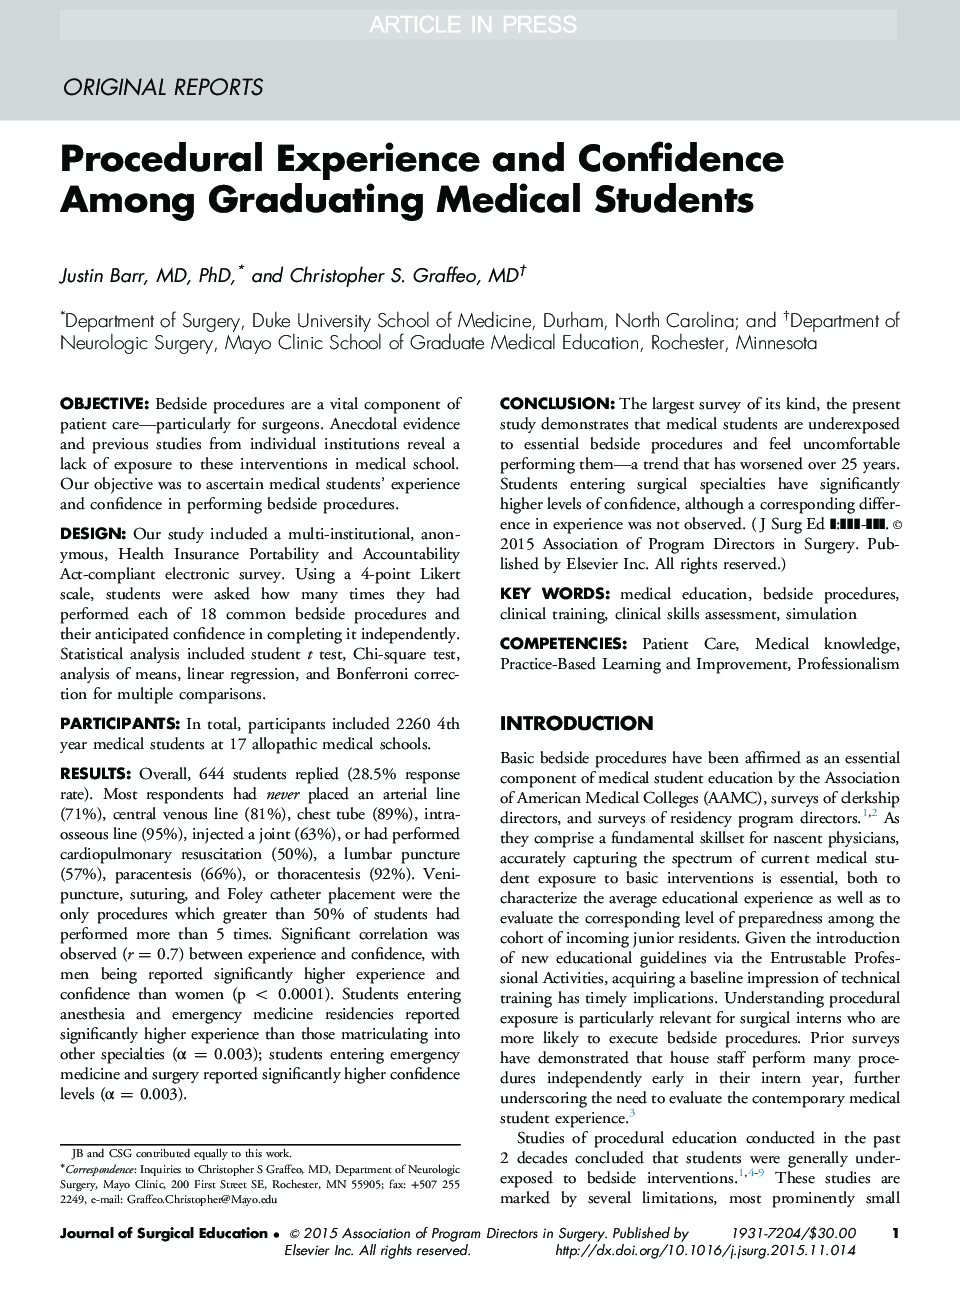 Procedural Experience and Confidence Among Graduating Medical Students